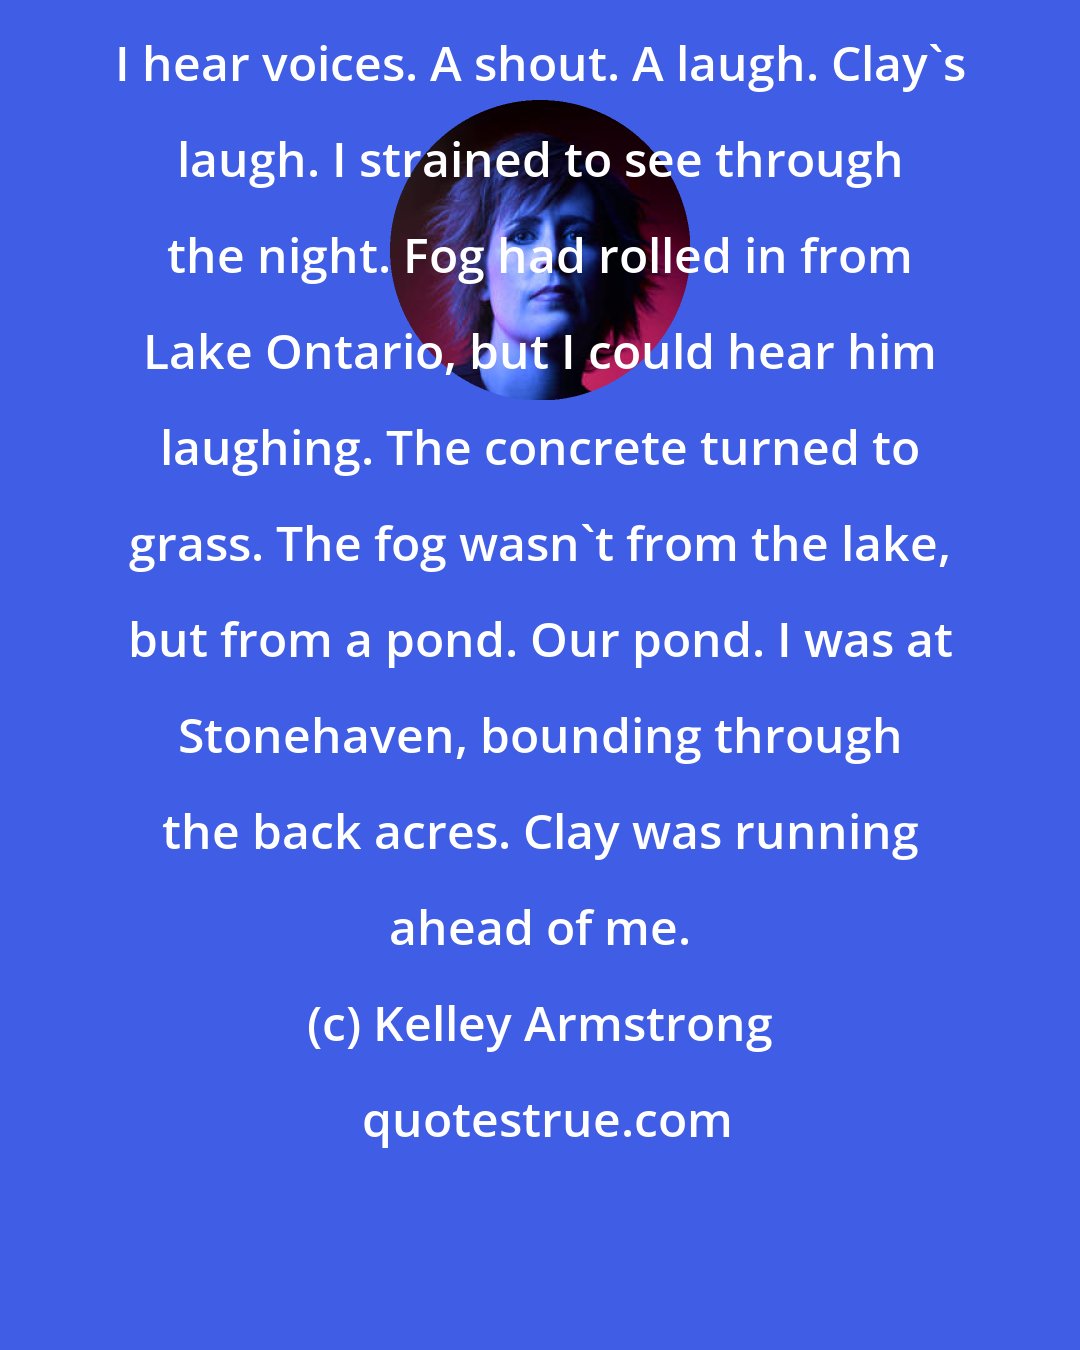 Kelley Armstrong: I hear voices. A shout. A laugh. Clay's laugh. I strained to see through the night. Fog had rolled in from Lake Ontario, but I could hear him laughing. The concrete turned to grass. The fog wasn't from the lake, but from a pond. Our pond. I was at Stonehaven, bounding through the back acres. Clay was running ahead of me.